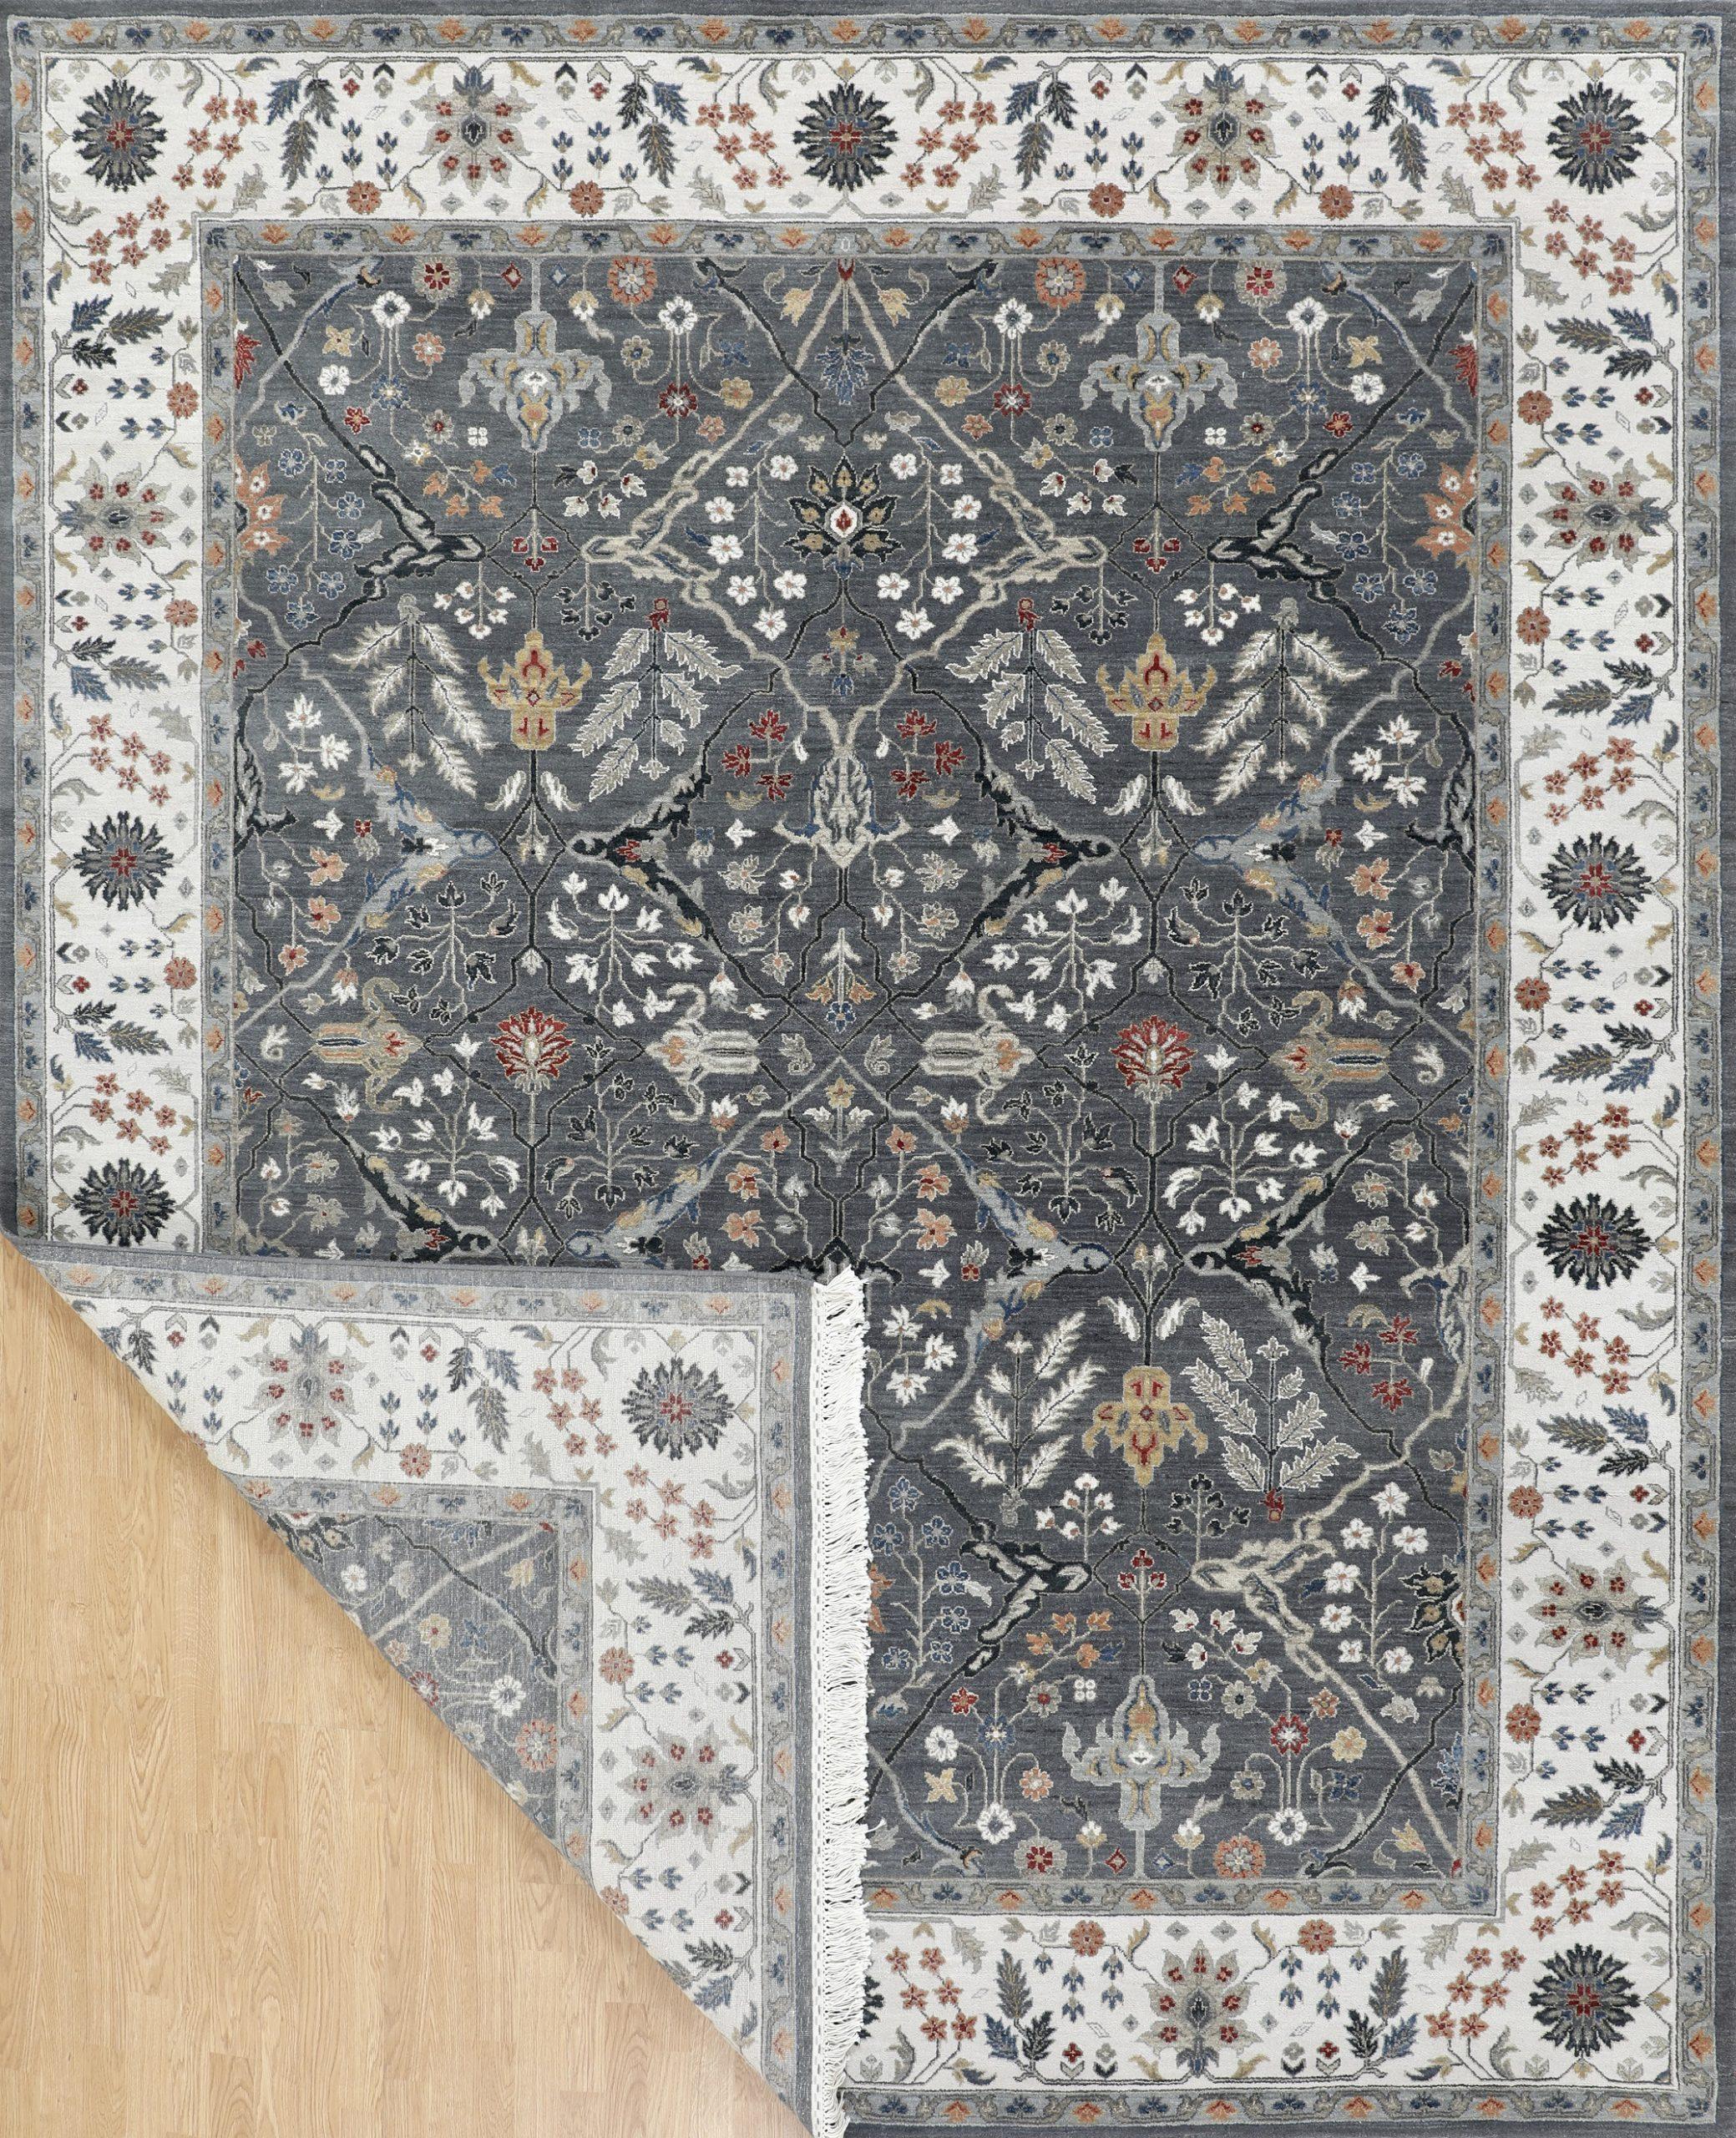 Hand-knotted using Persian technique.

Our production- this rug measures 8' 2